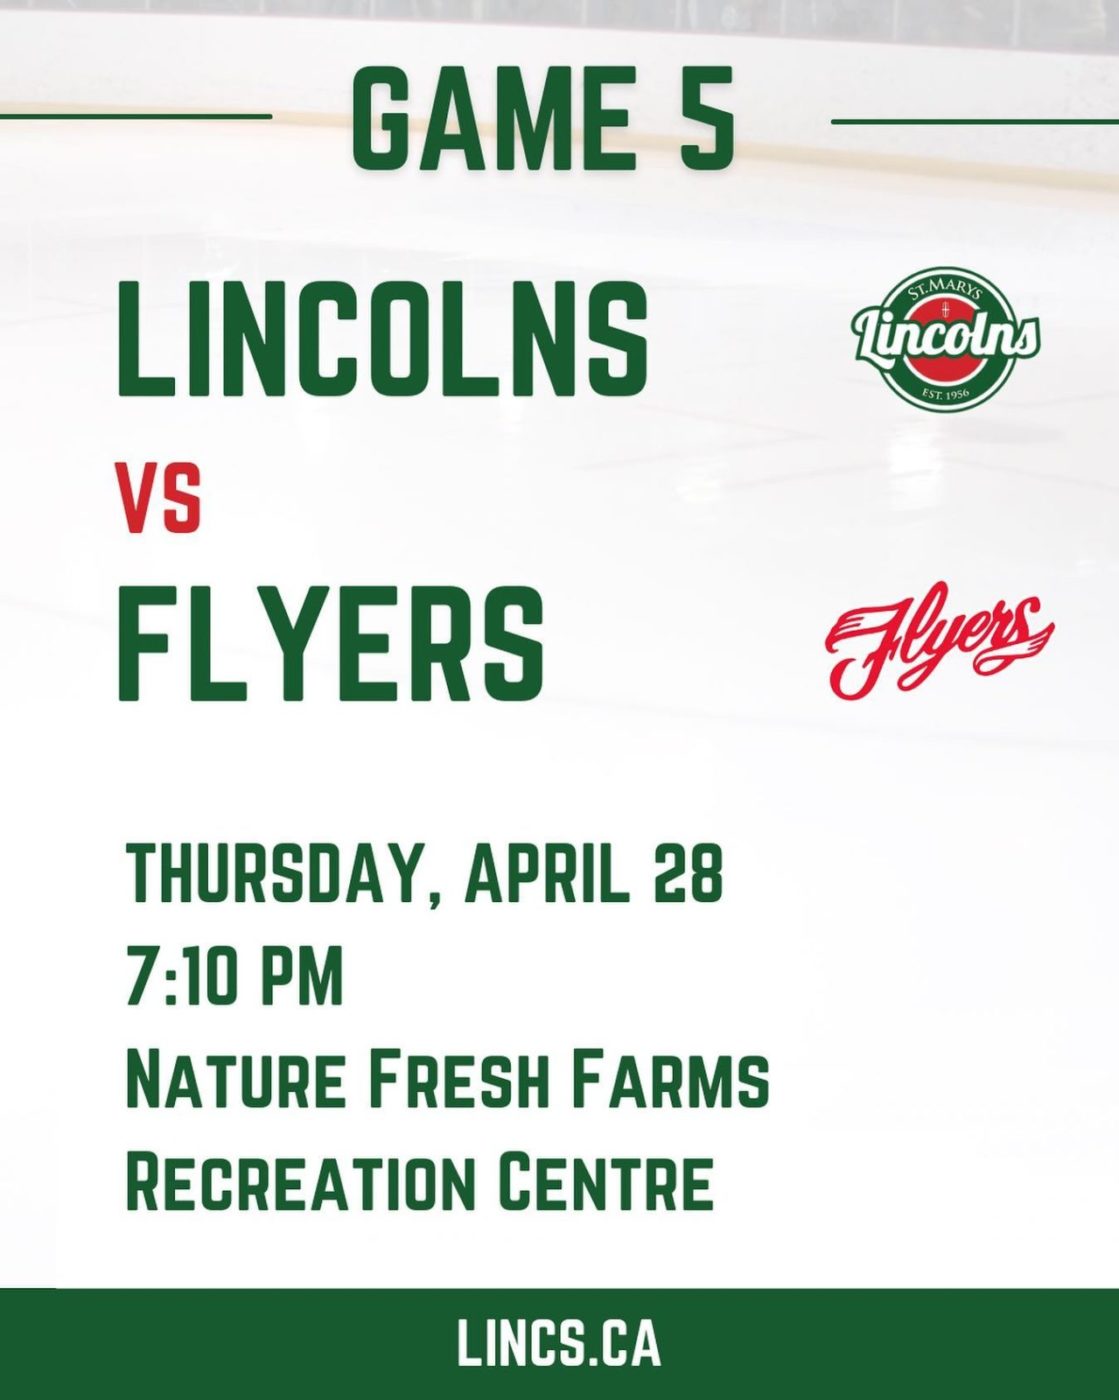 GAME DAY - Lincs travel to Leamington for Game 5 tonight! Listen live with St. Marys Radio #GoLincsGo